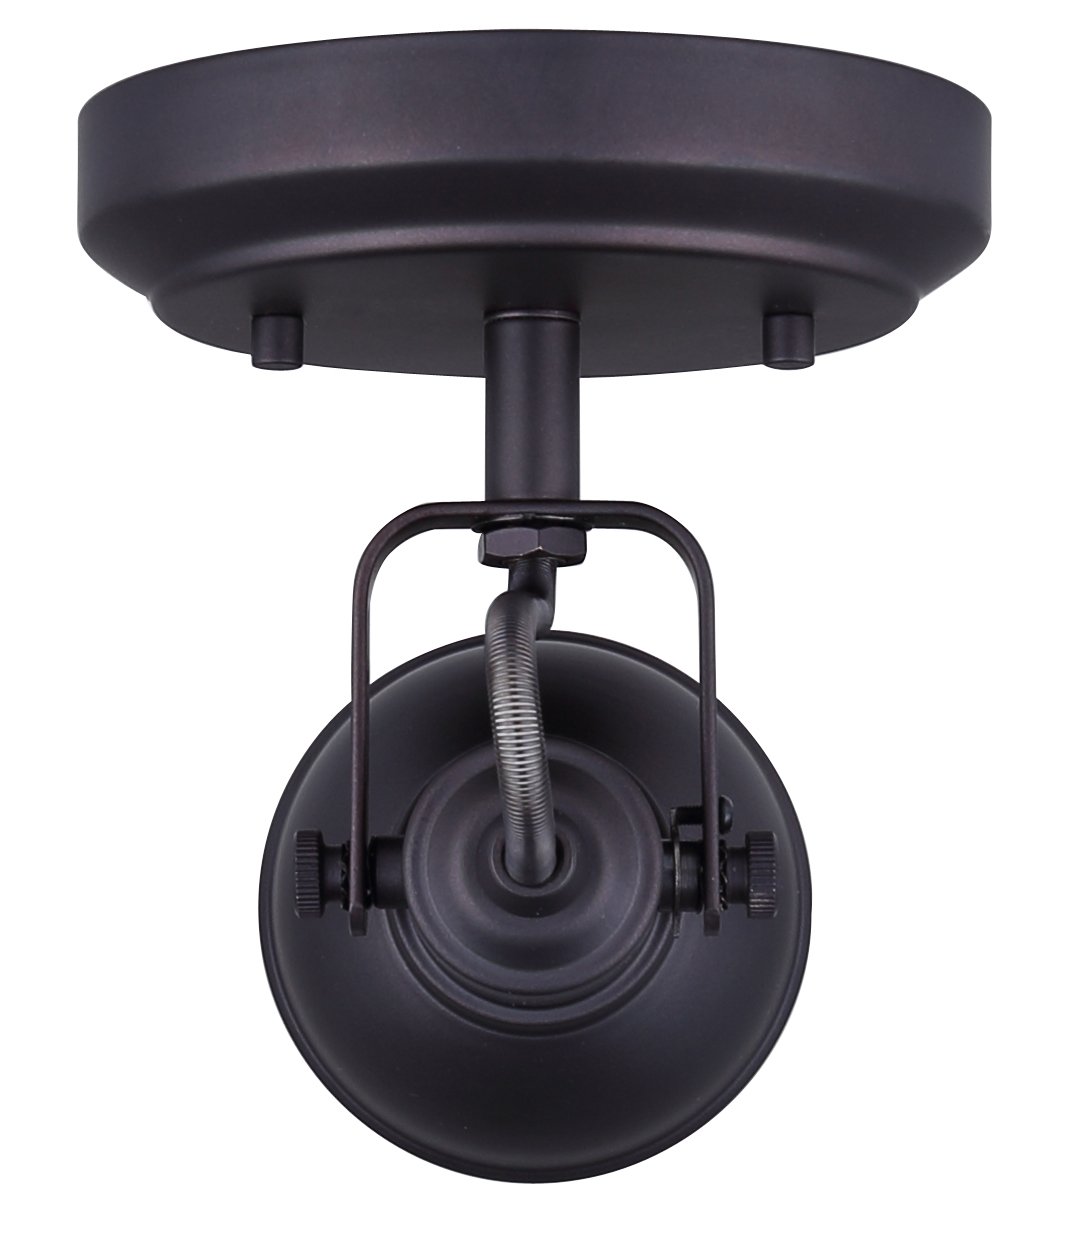 CANARM ICW622A01ORB10 LTD Polo 1 Light Ceiling/Wall, Oil Rubbed Bronze with Adjustable Head , Oil-rubbed Bronze